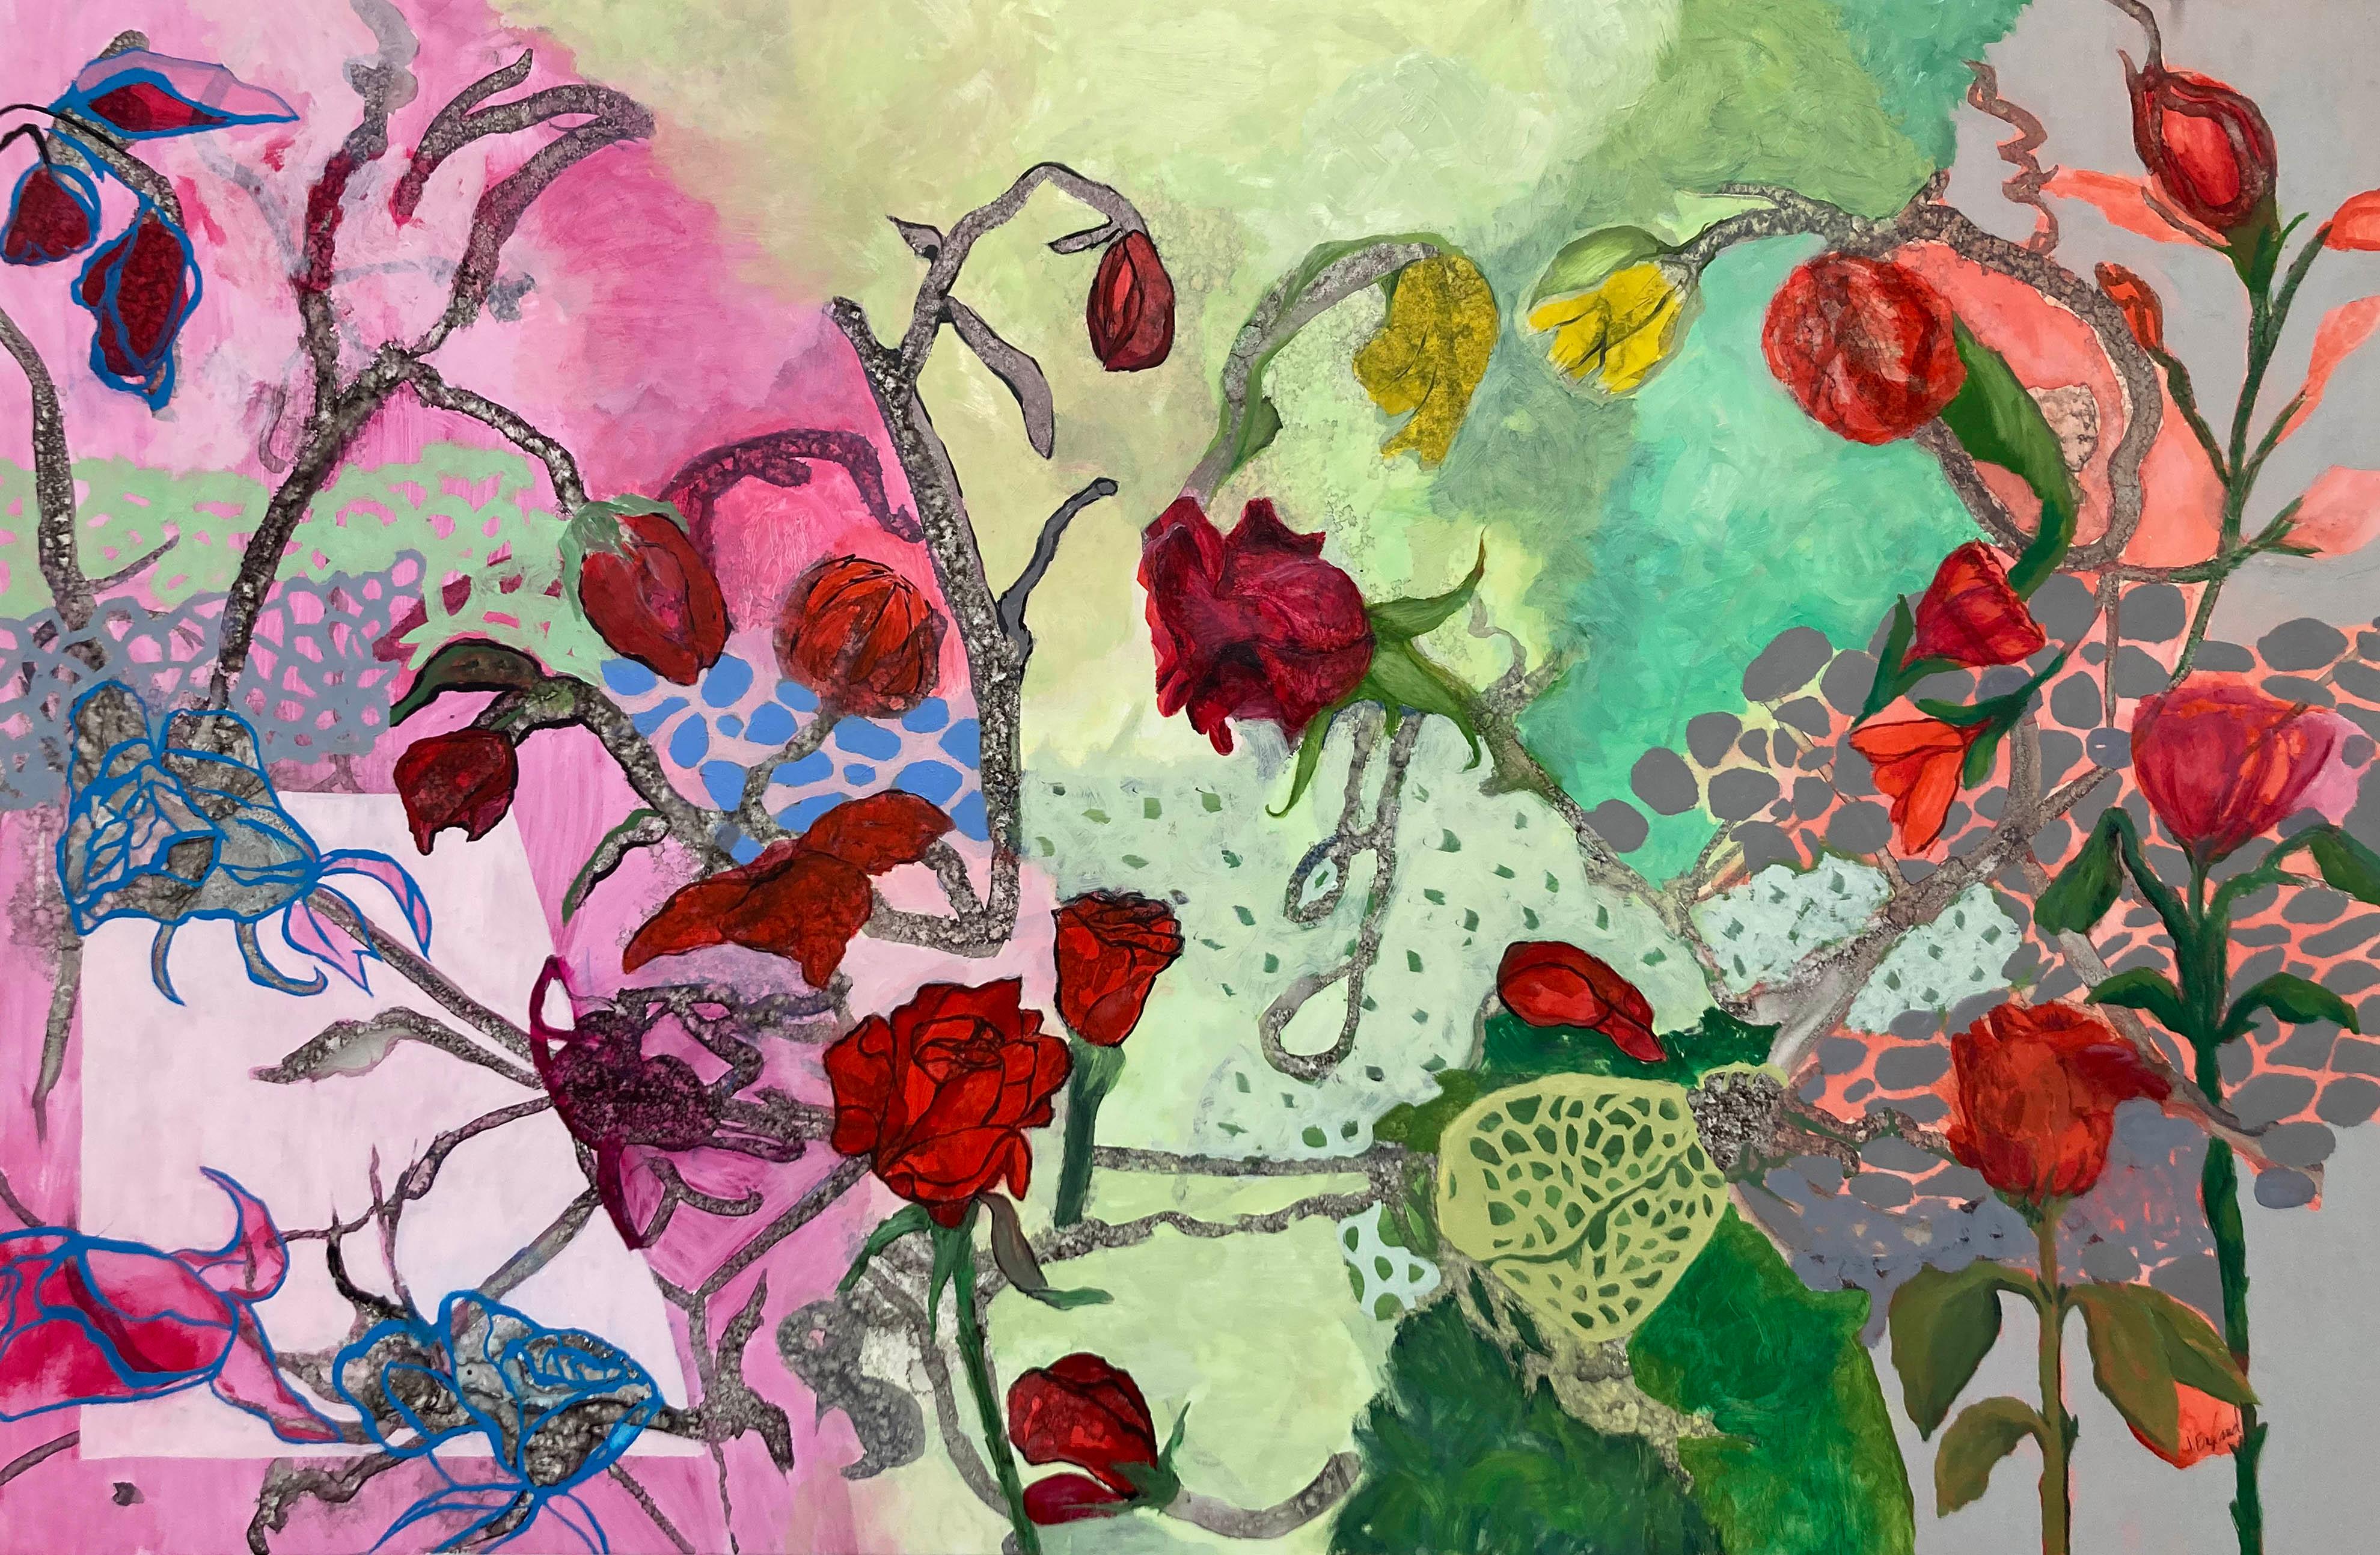 Red Roses  Ink,  Watercolor, Oil on Yupo 26″ x 40″ Image 31 1/4″ x 45 1/4″ Frame